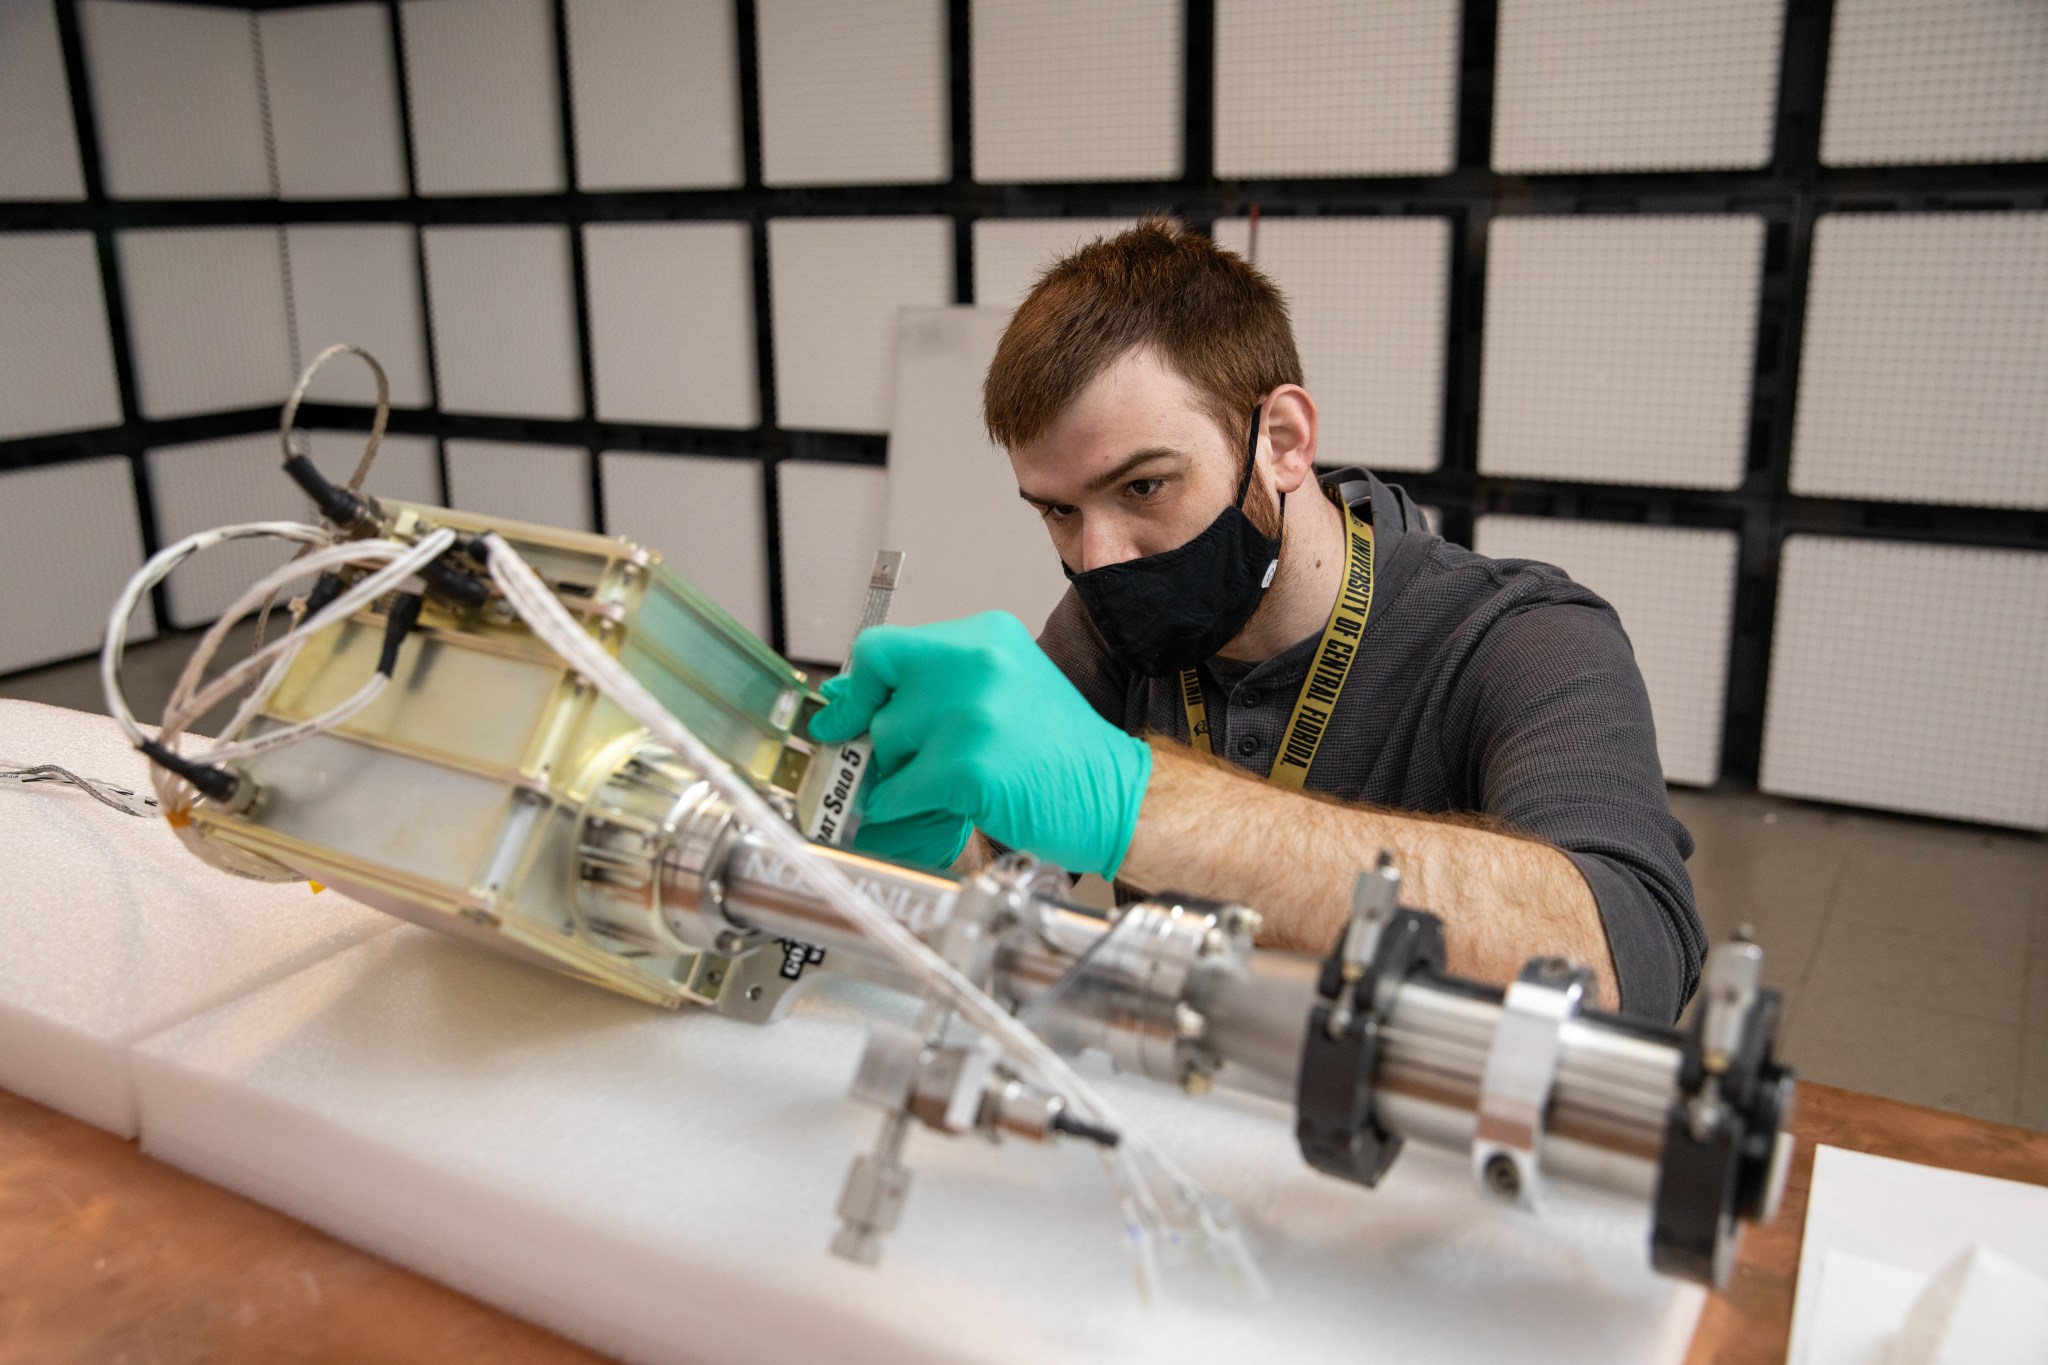 Electronics Engineer and Mass Spectrometer Observing Lunar Operations (MSolo) team member Nate Cain conducts electromagnetic interference (EMI) testing inside the EMI Laboratory at NASA’s Kennedy Space Center in Florida on Feb. 14, 2022.